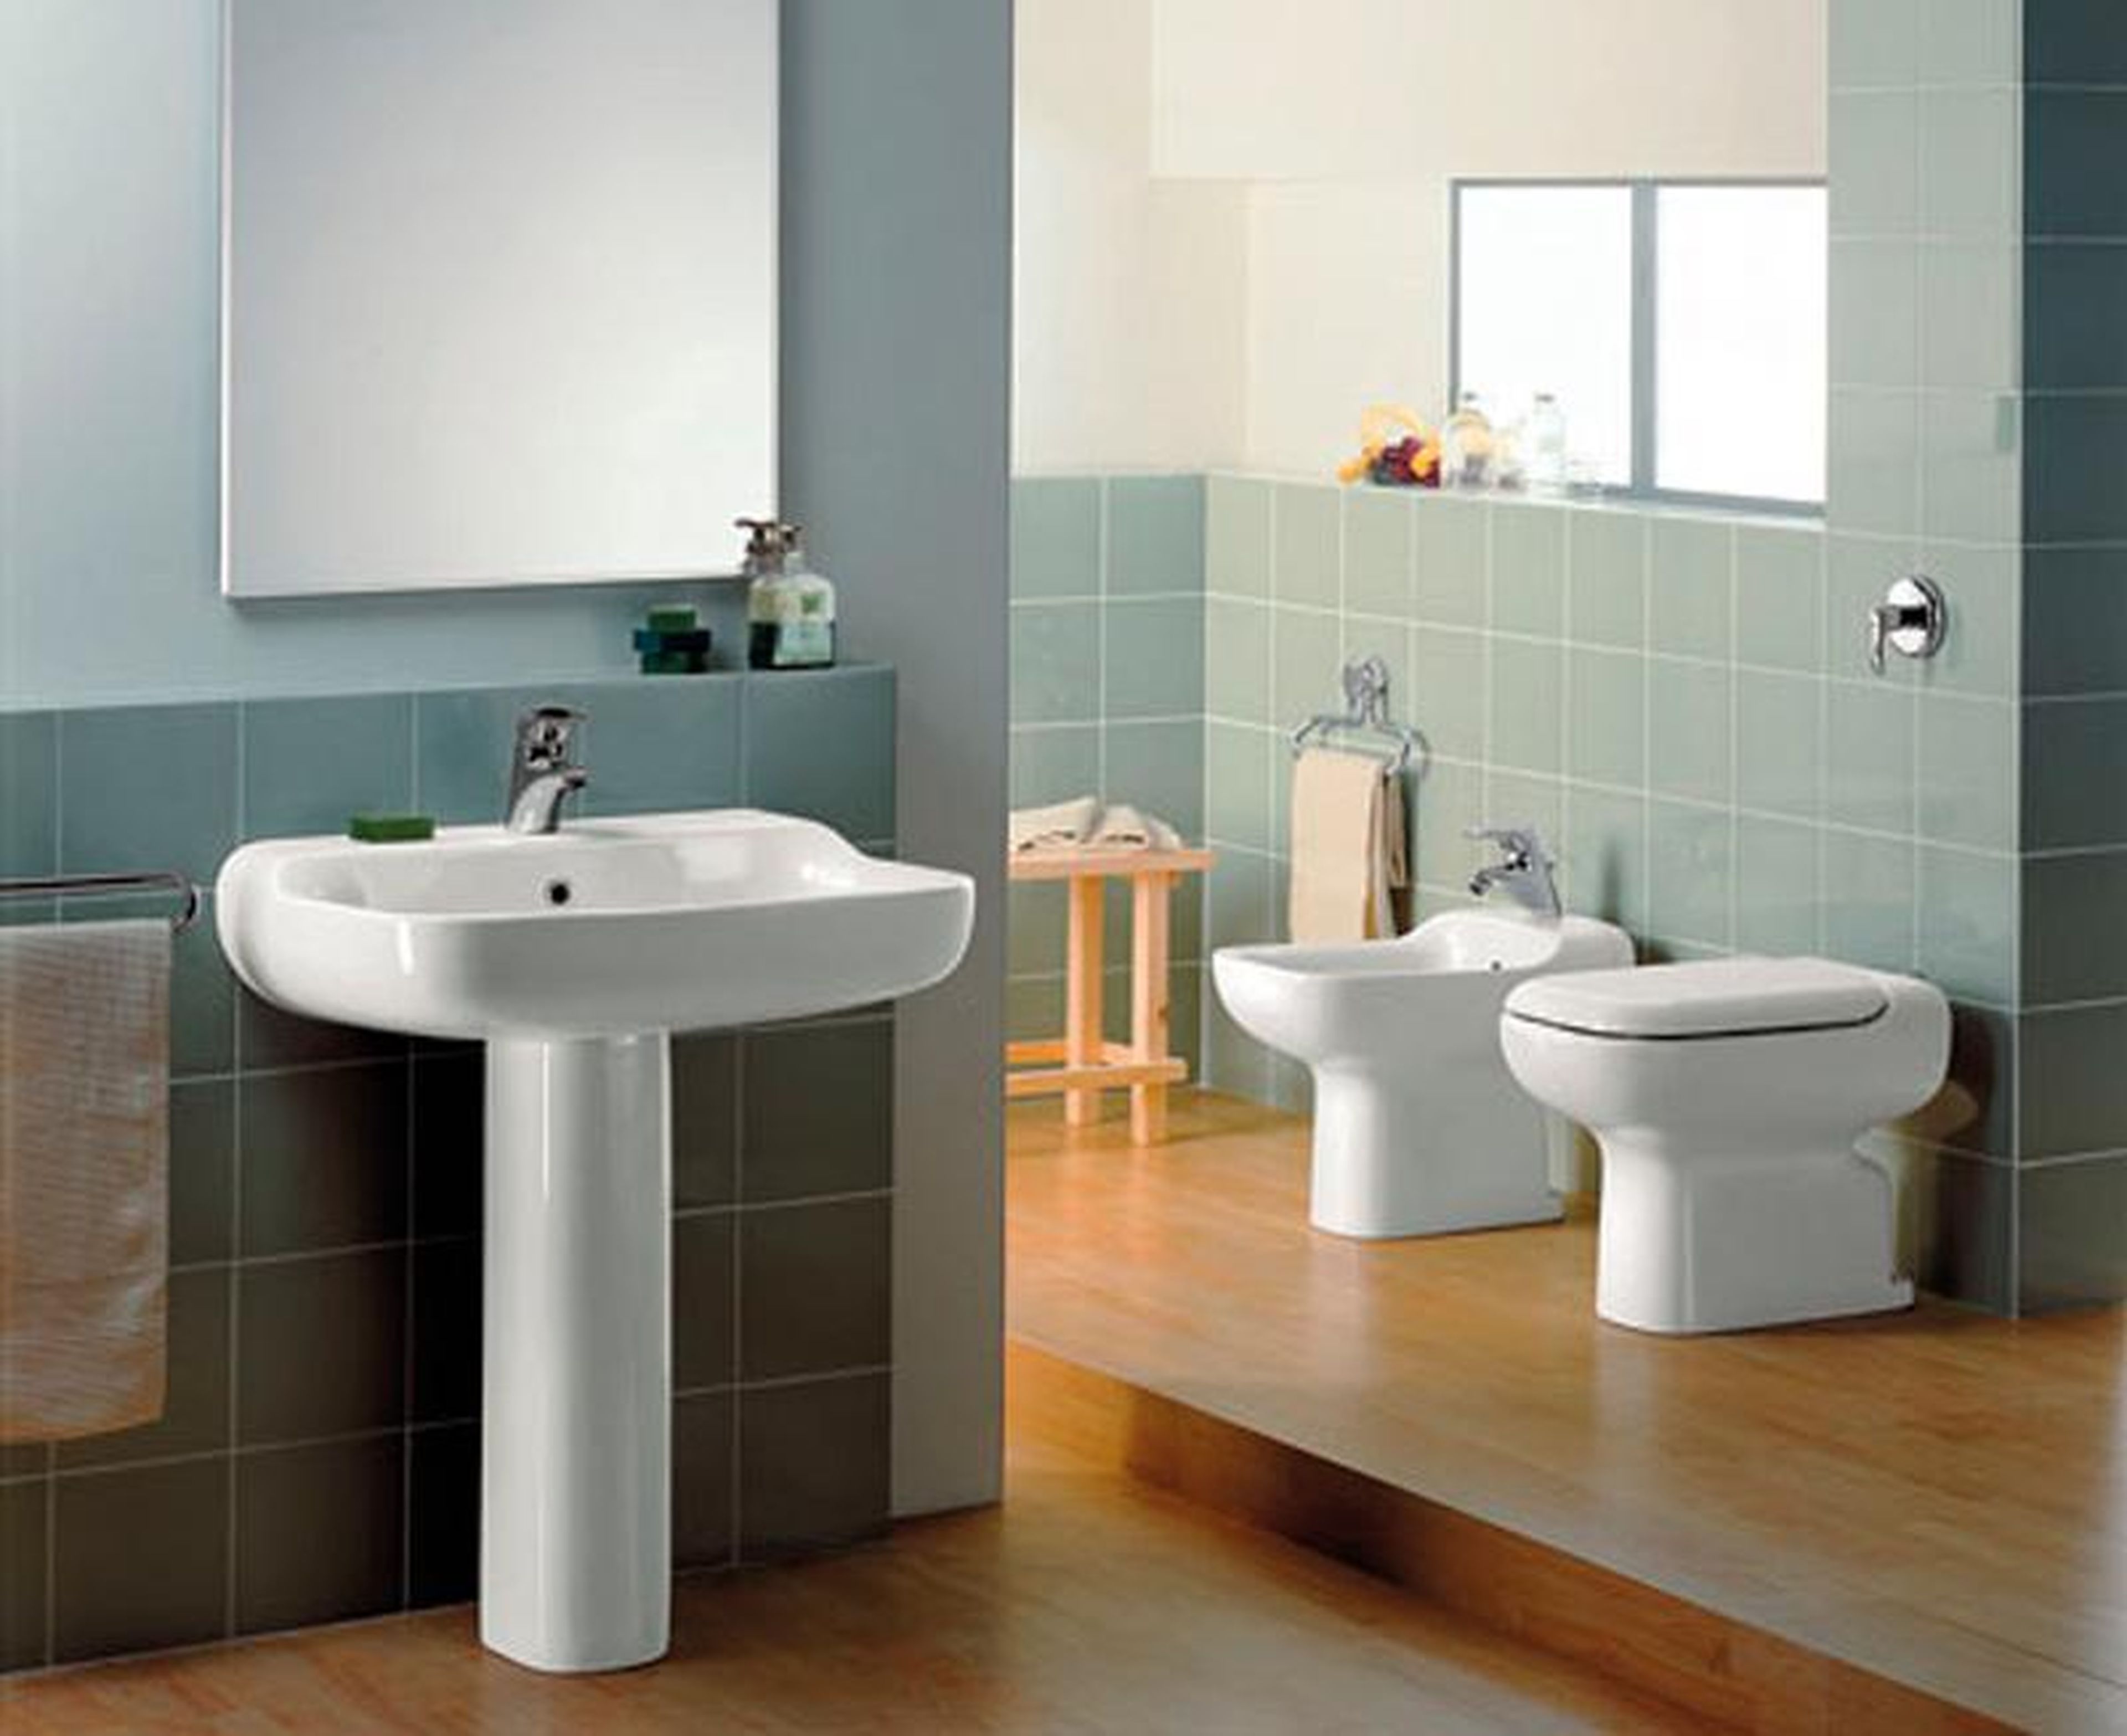 Here's what a bathroom would look like if it was designed by Ive, at least back in the 90s.